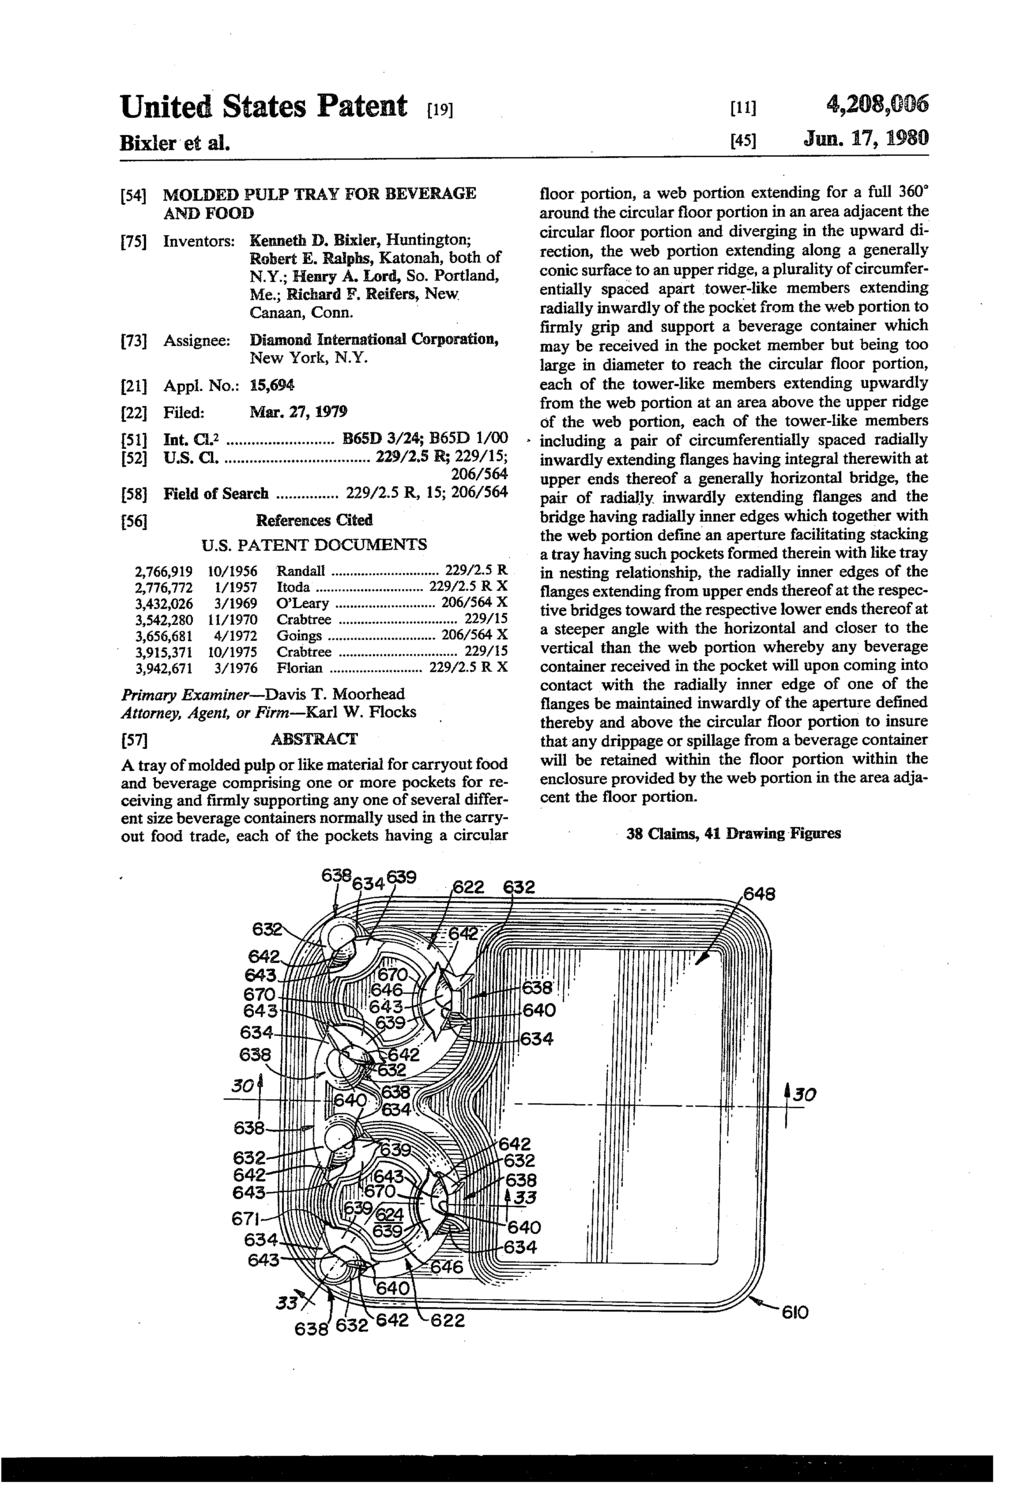 United States Patent (19) Bixler et al. 54 MOLDED PULP TRAY FOR BEVERAGE AND FOO) 75 Inventors: Kenneth D. Bixier, Huntington; Robert E. Ralphs, Katonah, both of N.Y.; Henry A. Lord, So. Portland, Me.